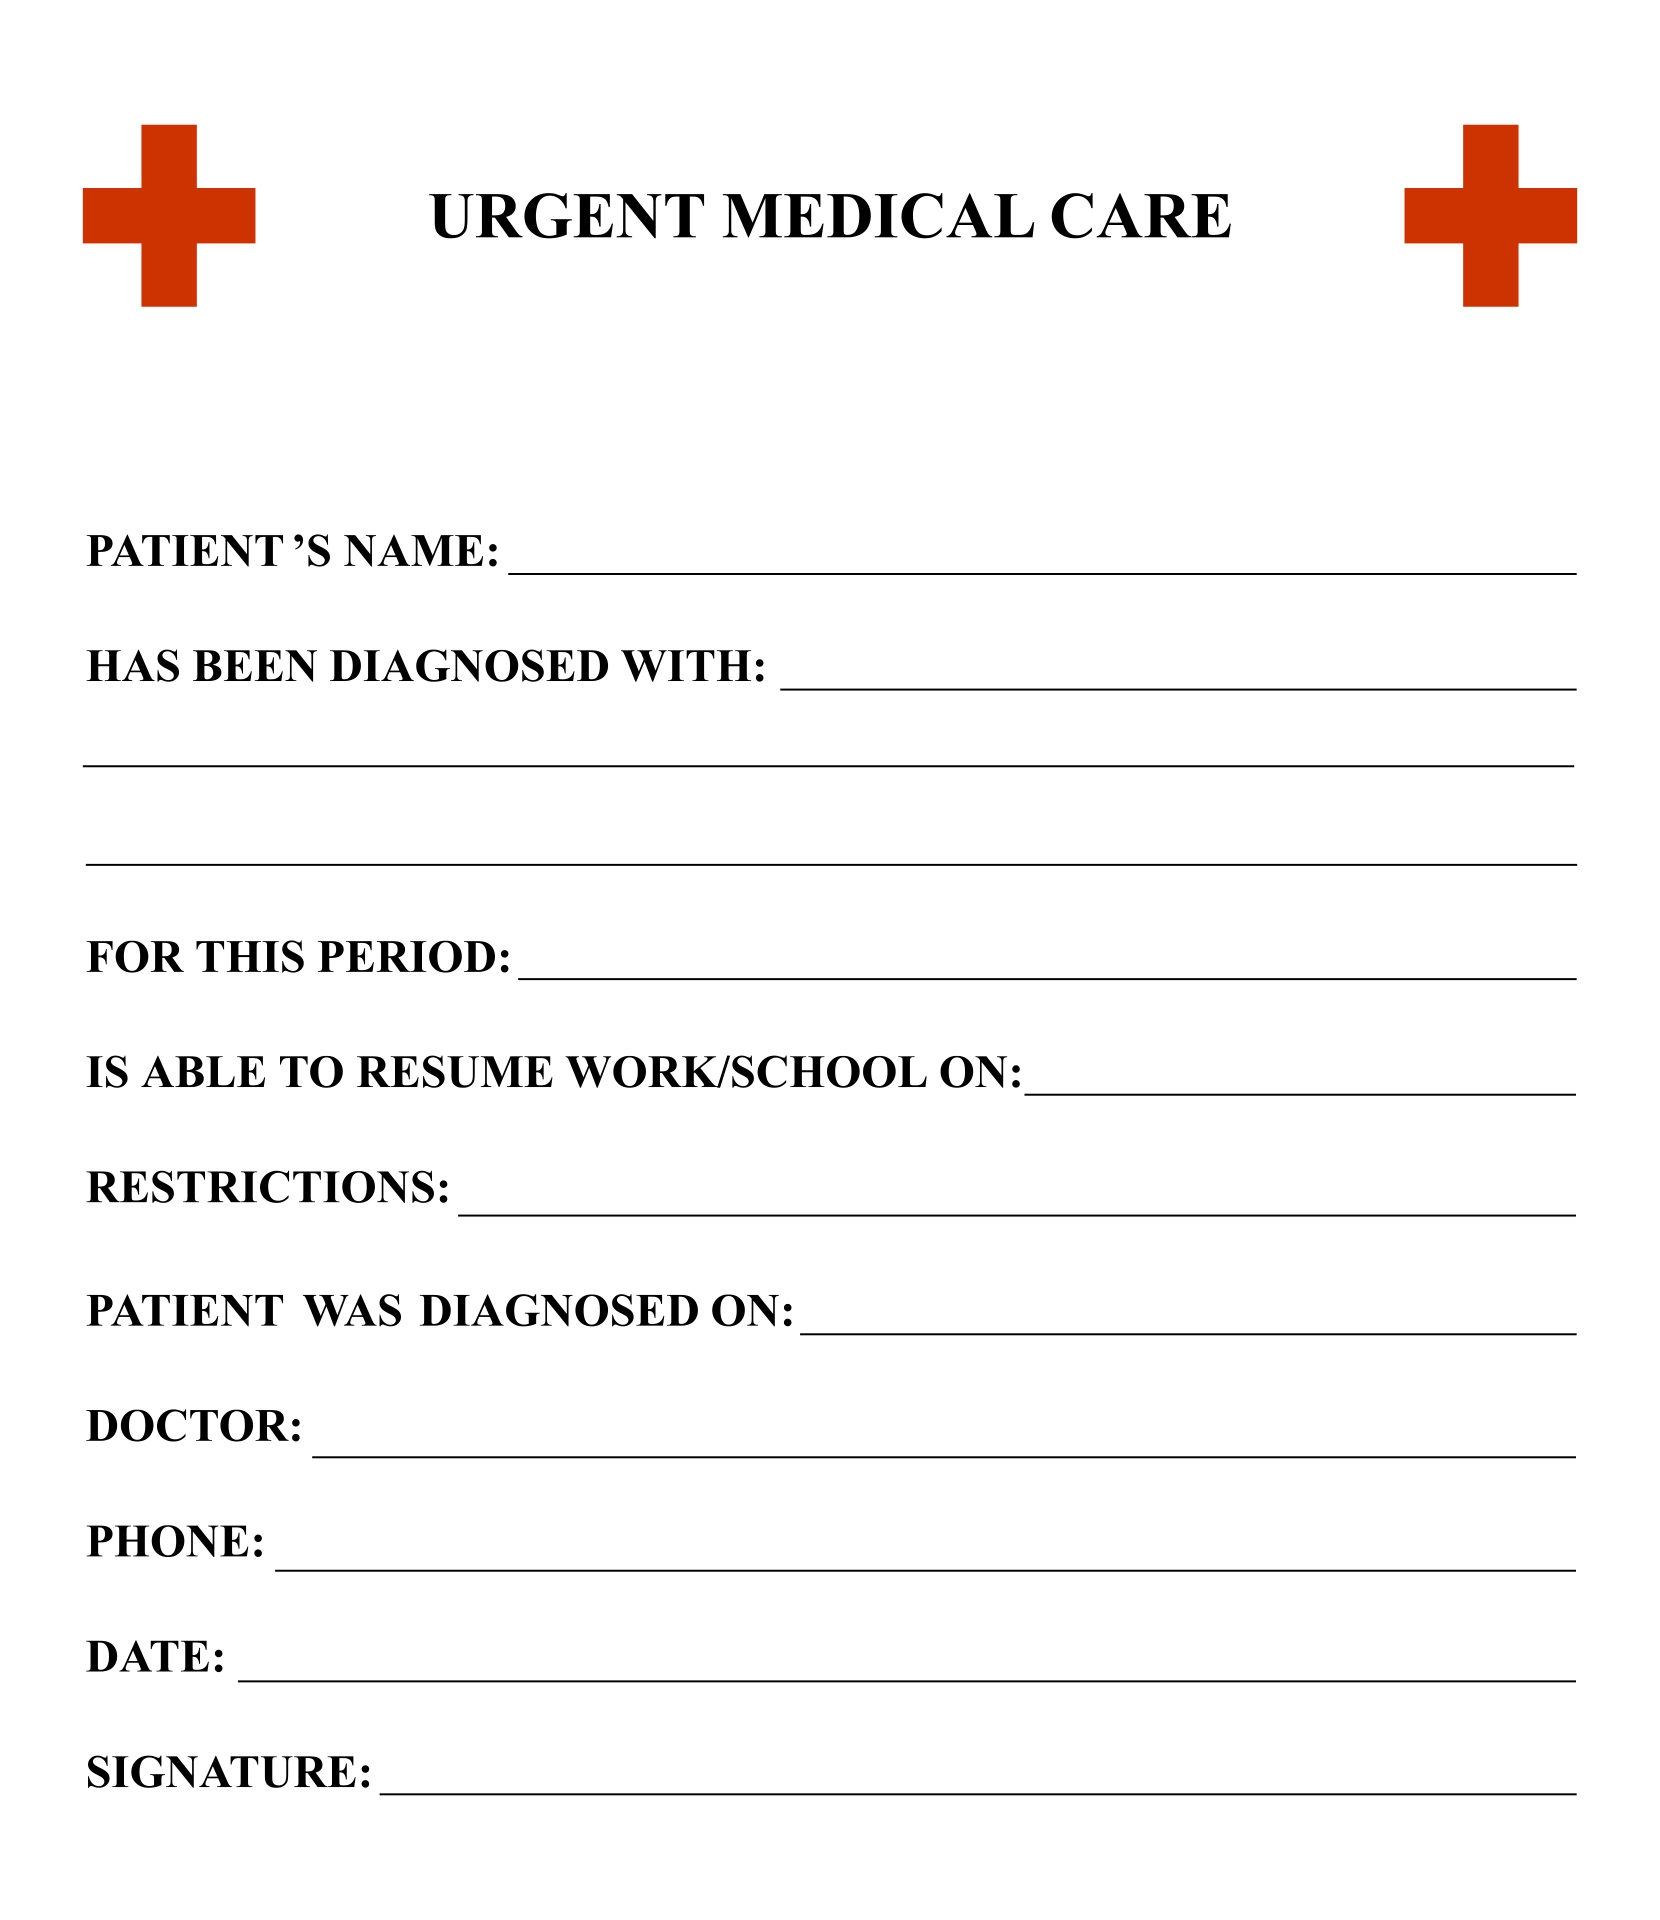 42-urgent-care-doctors-note-free-to-edit-download-print-cocodoc-30